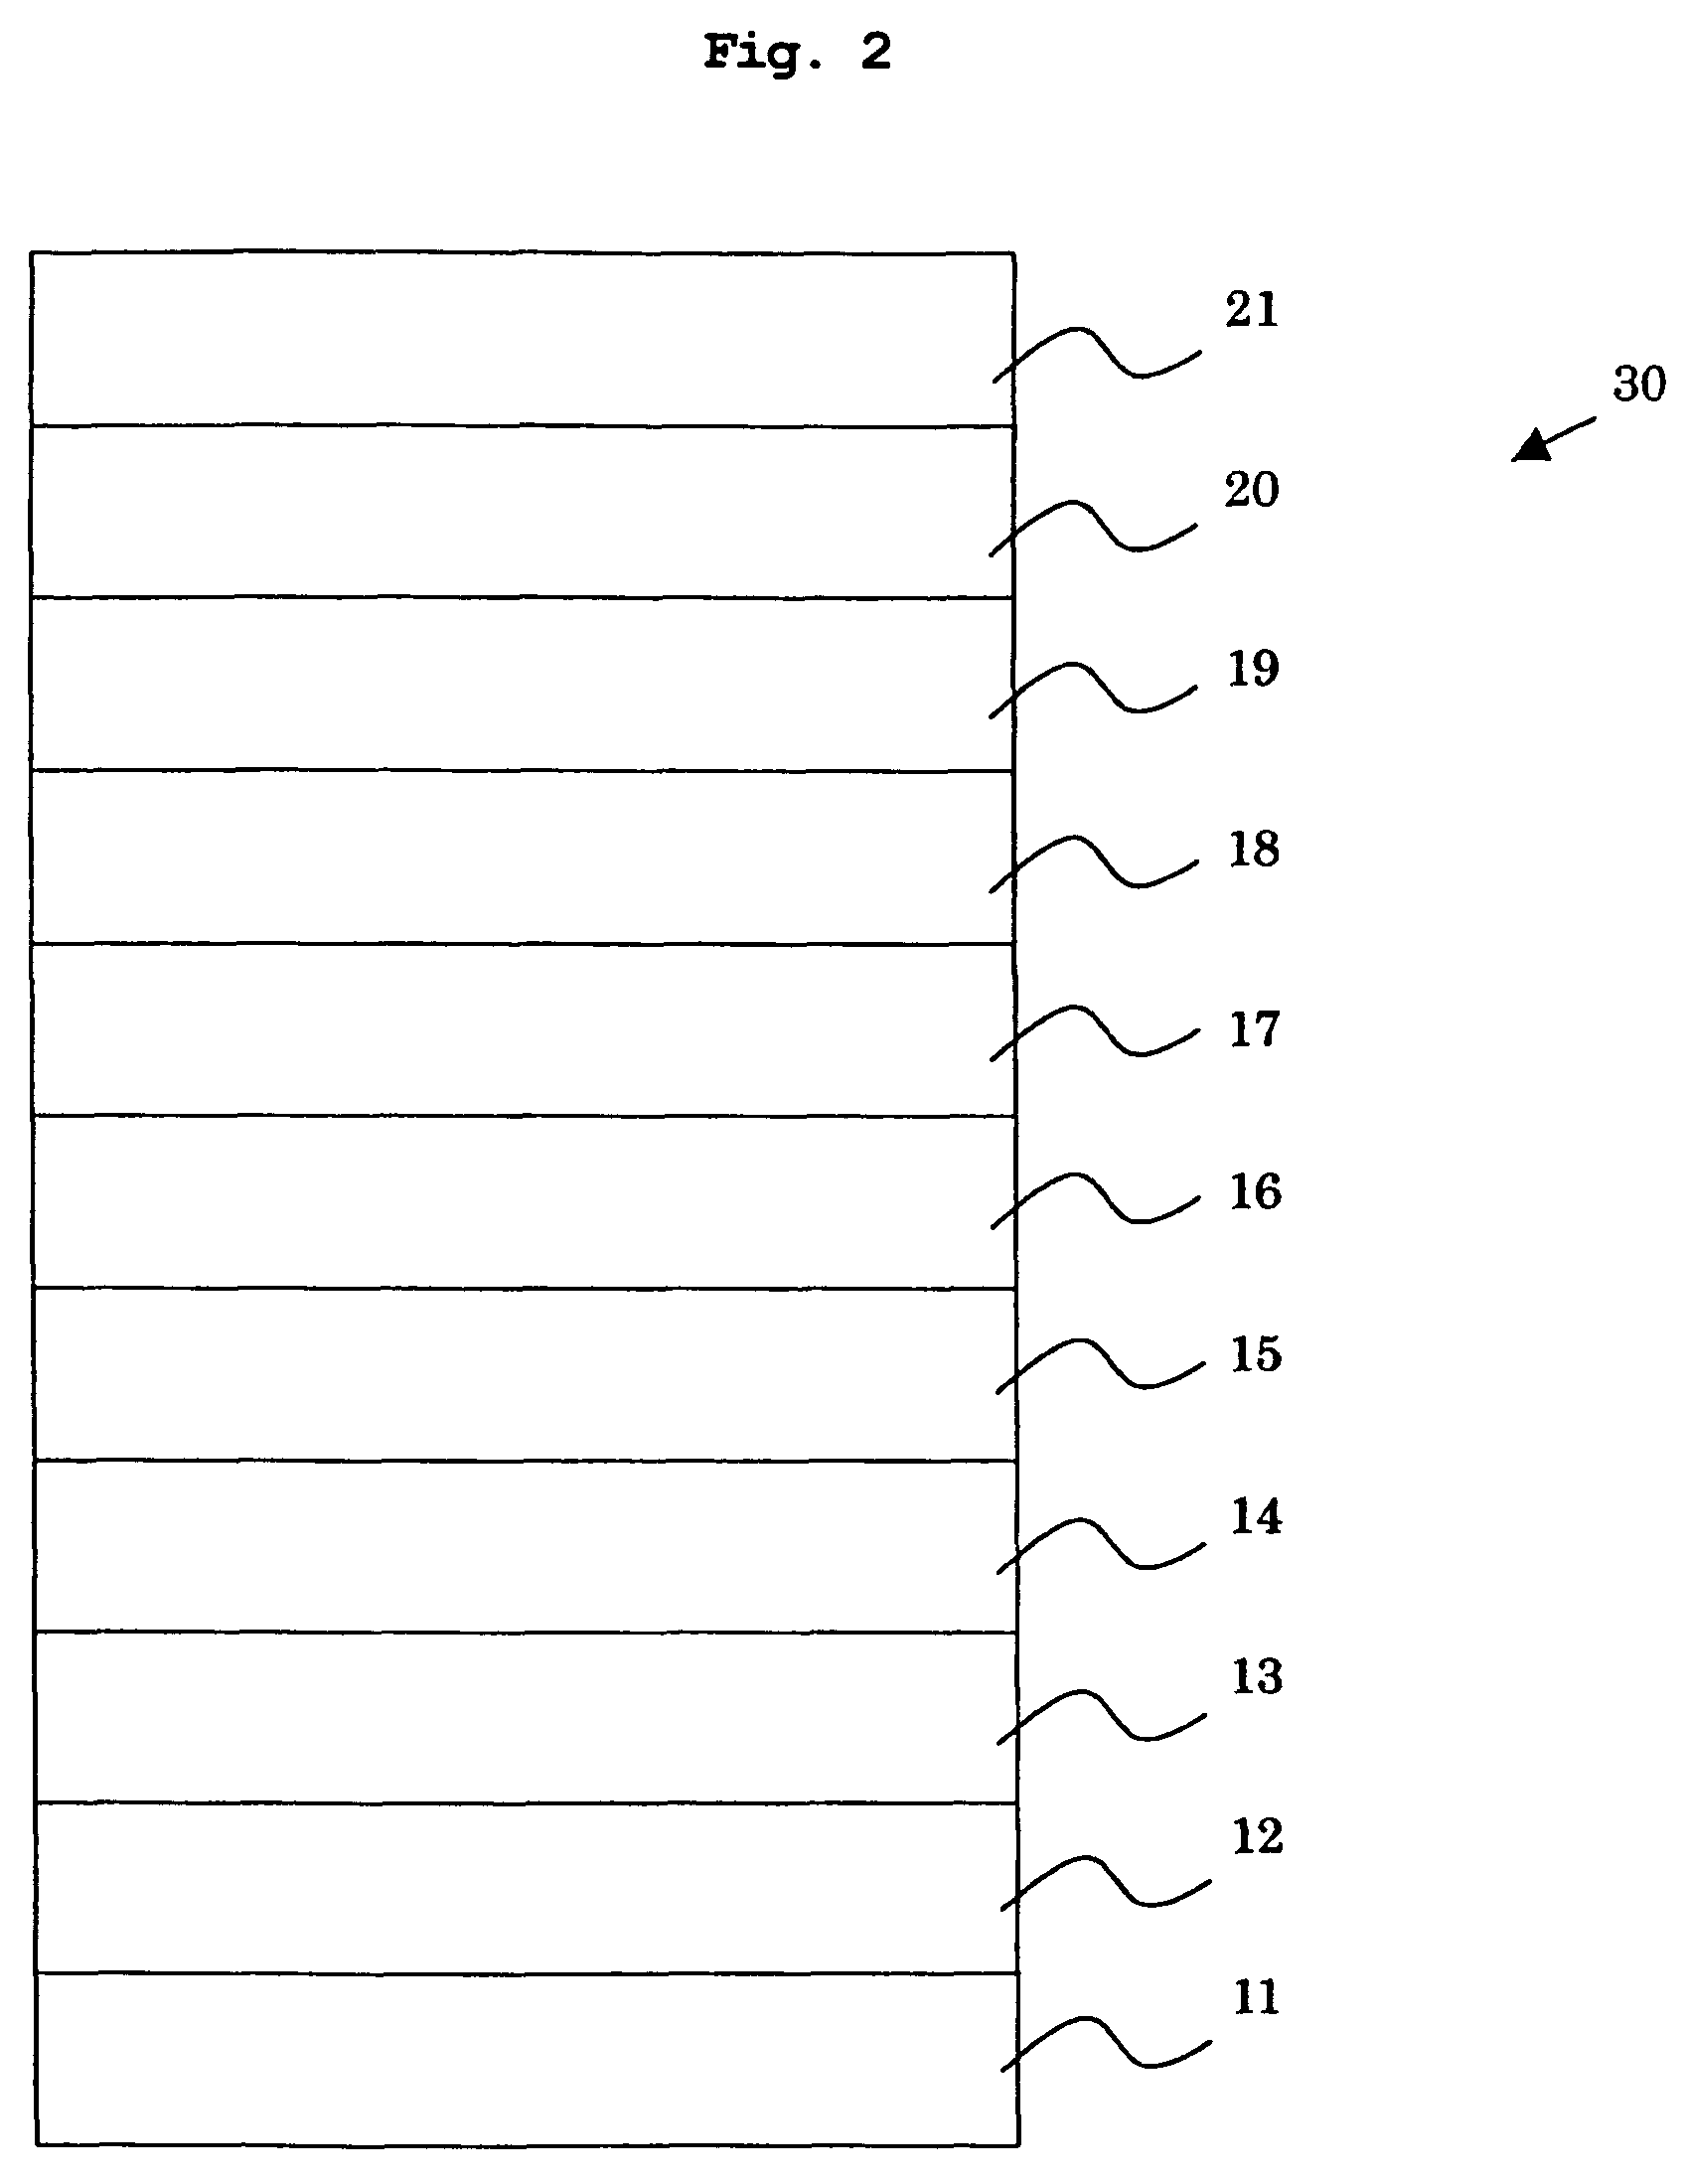 Compound semiconductor epitaxial substrate and method for producing the same